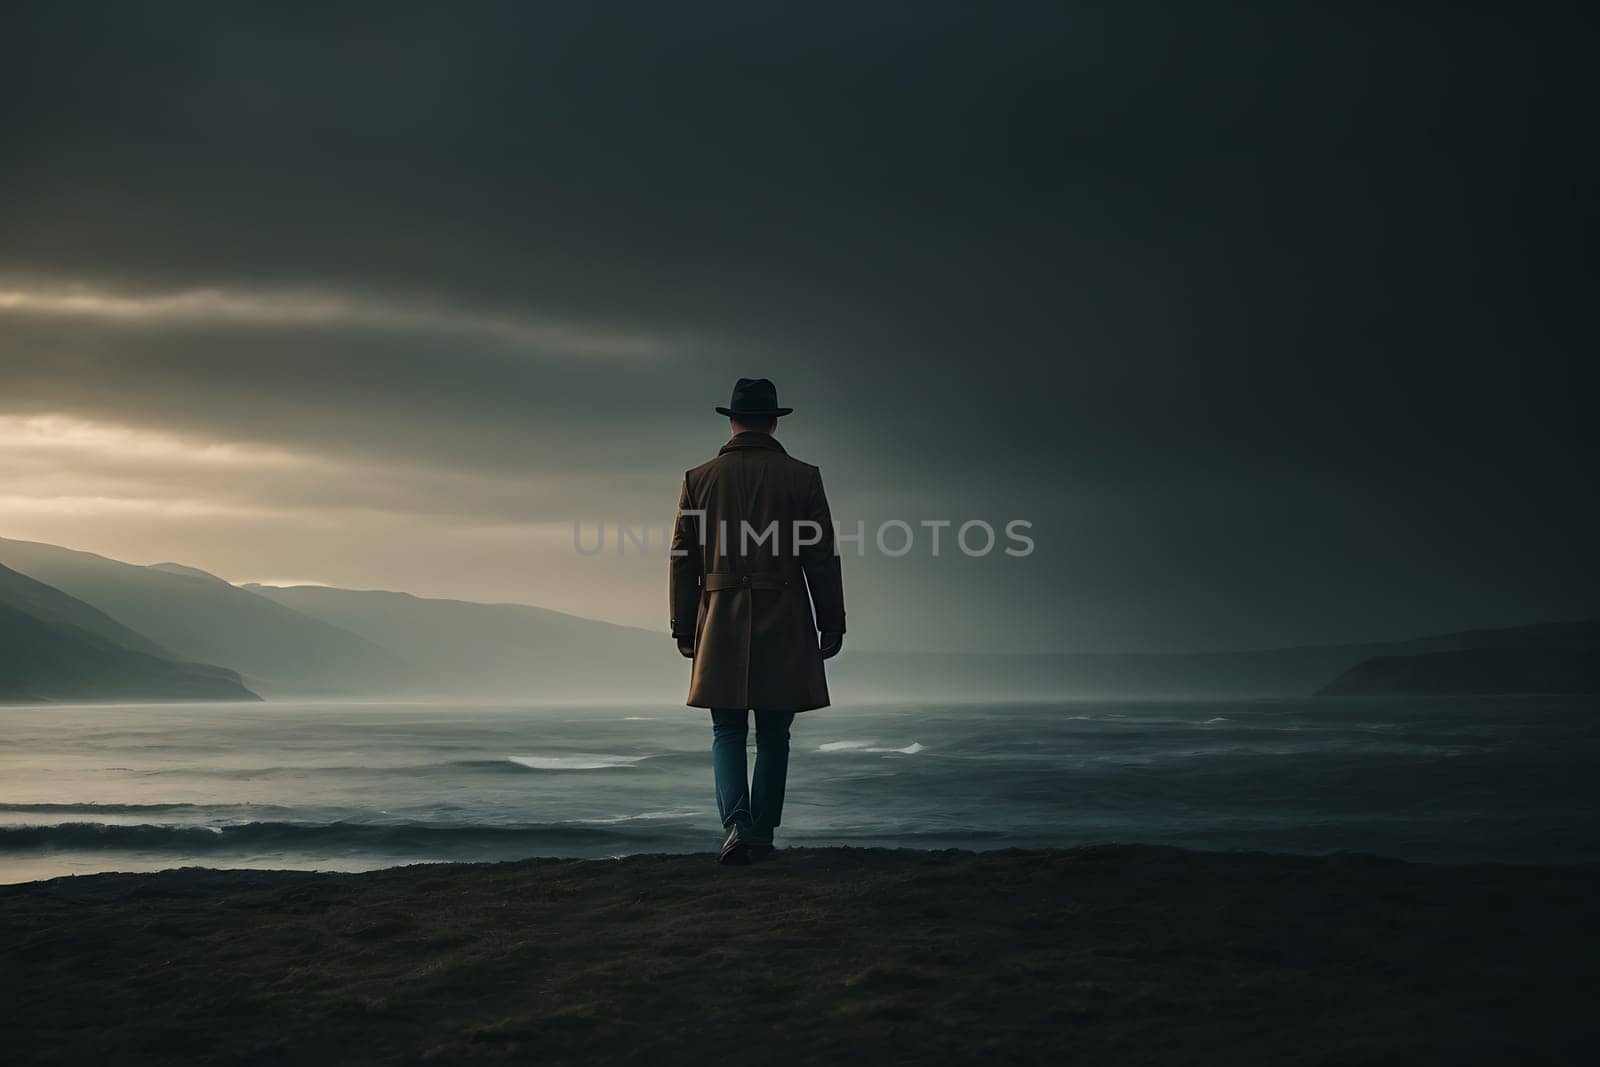 A mysterious man in a trench coat and hat stands on the beach, watching the tranquil scenery.